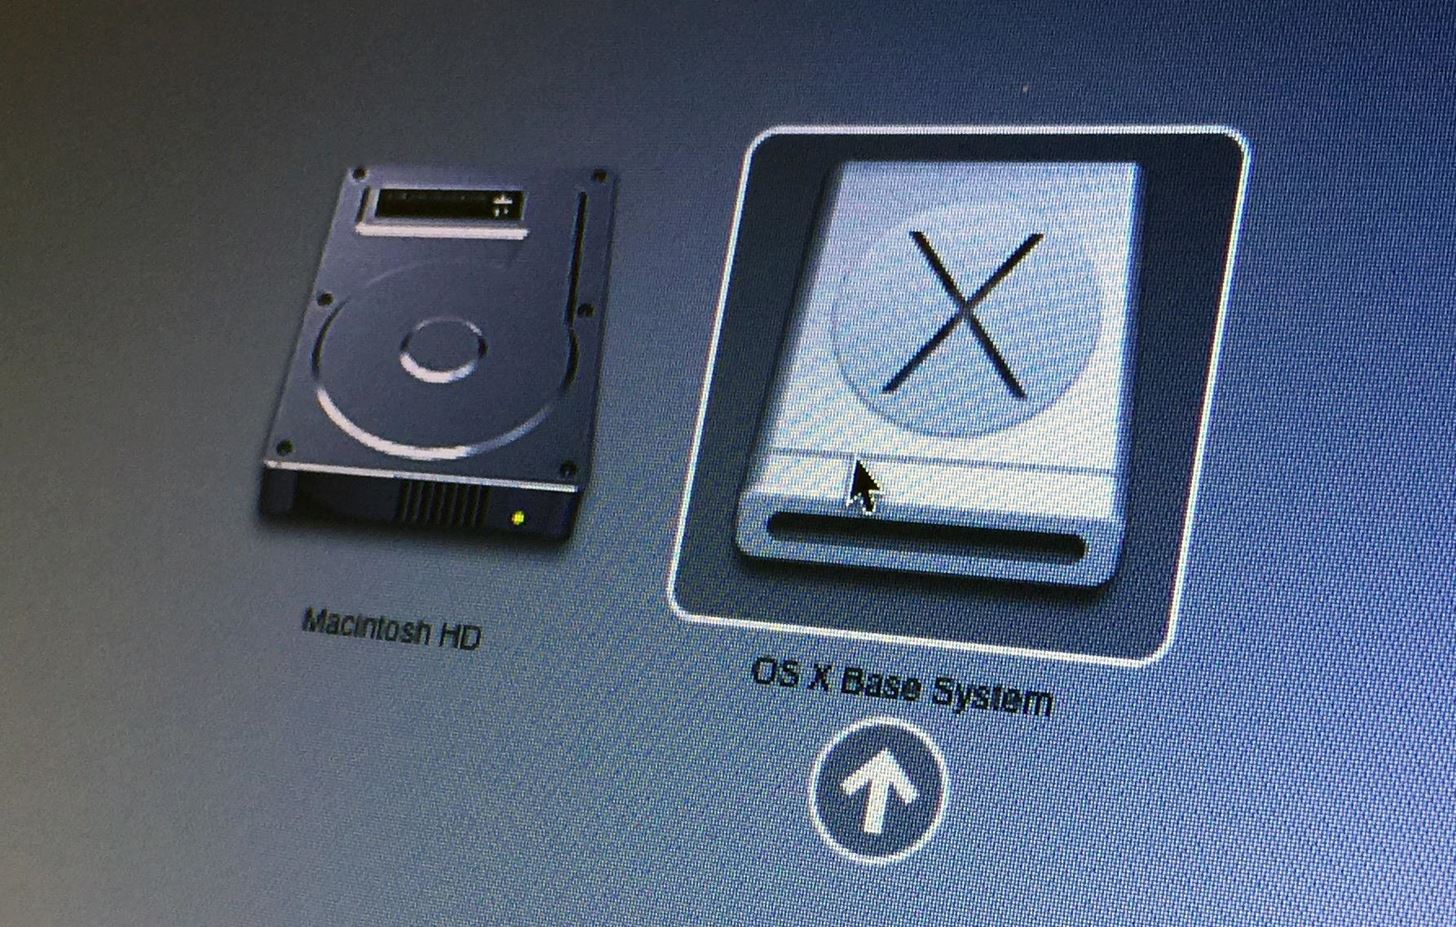 download bootable mac os disk